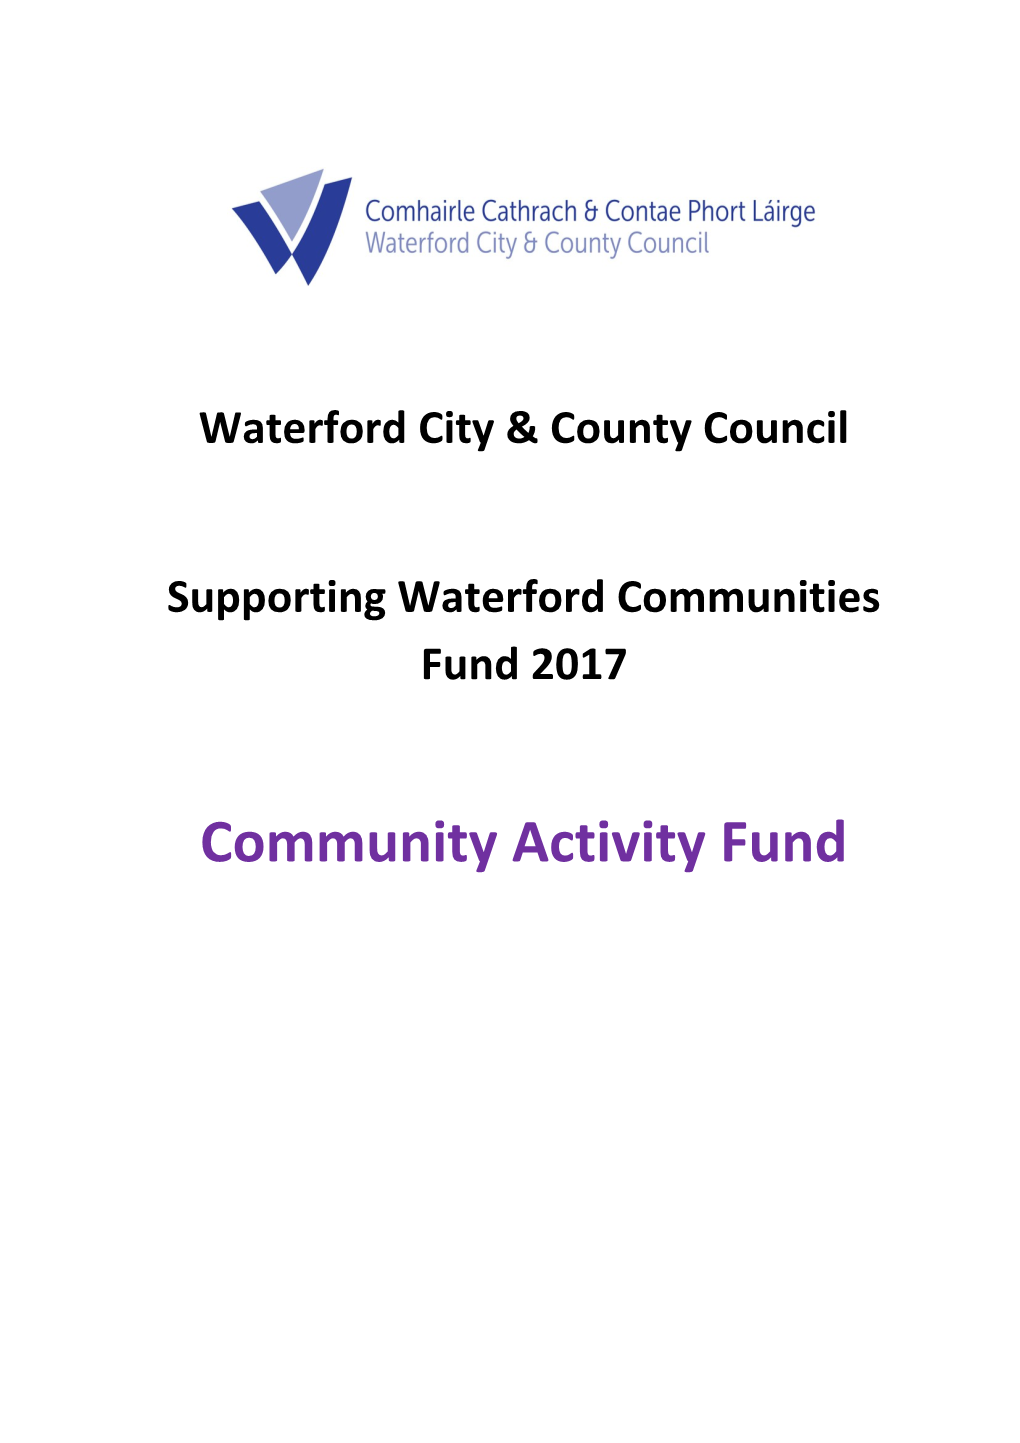 Community Activity Fund Guide 2017